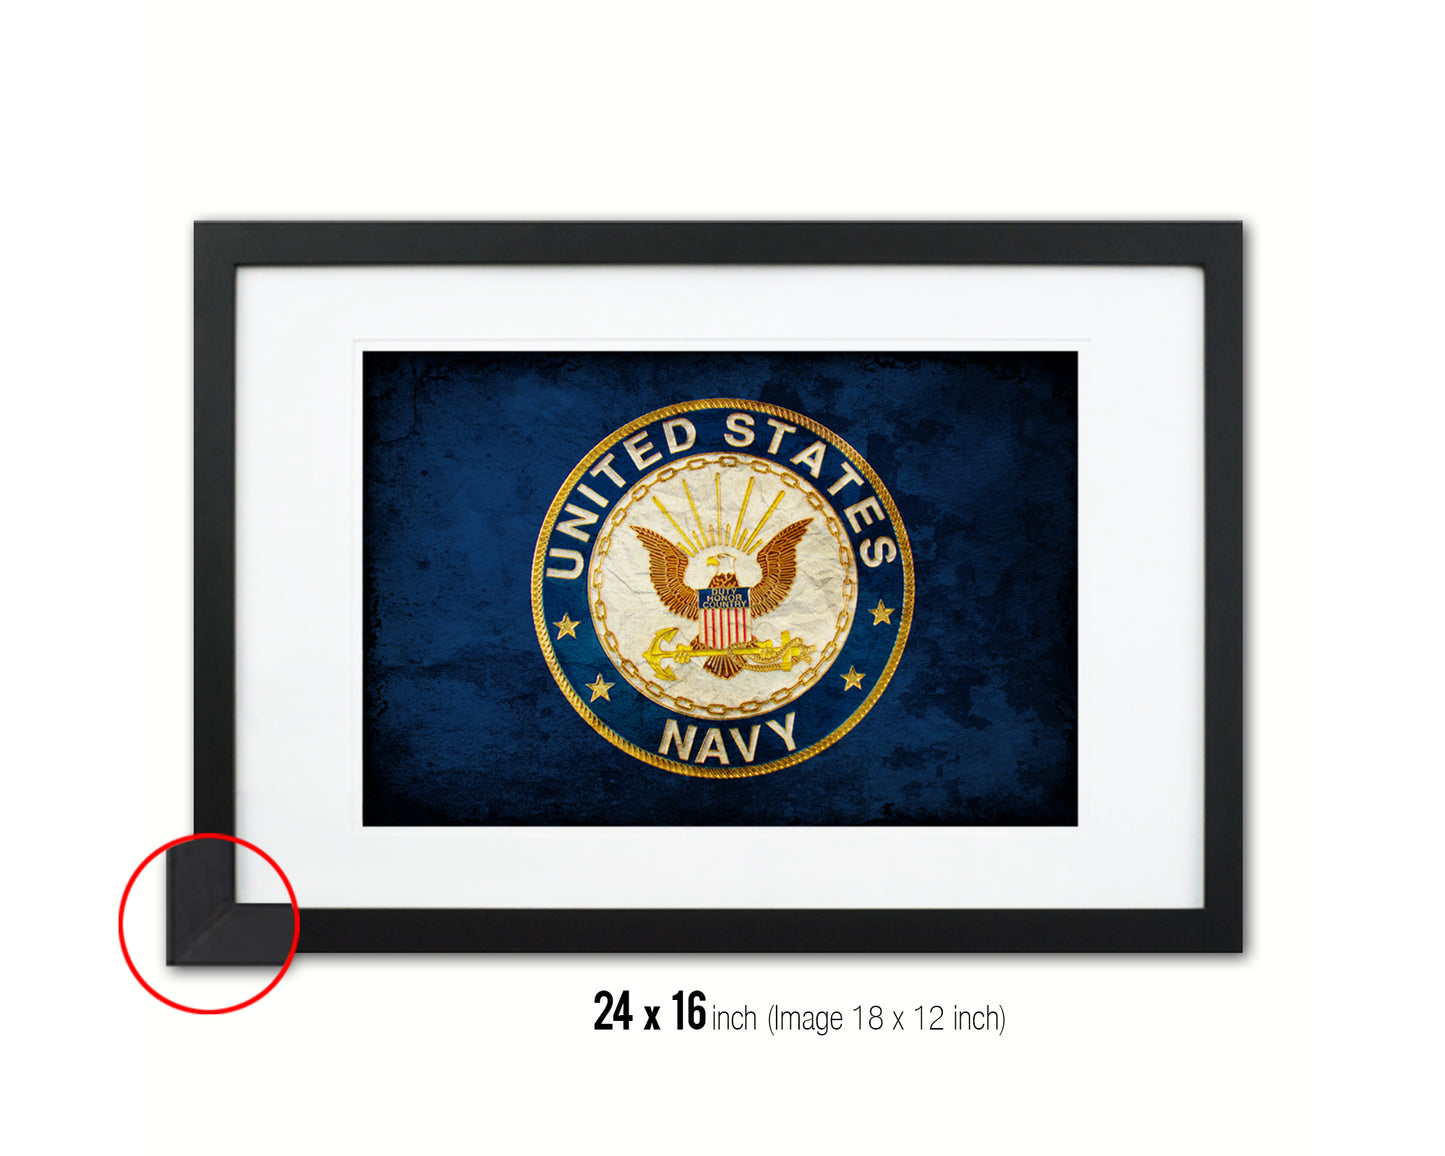 US Navy Seal Vintage Military Flag Framed Print Sign Decor Wall Art Gifts